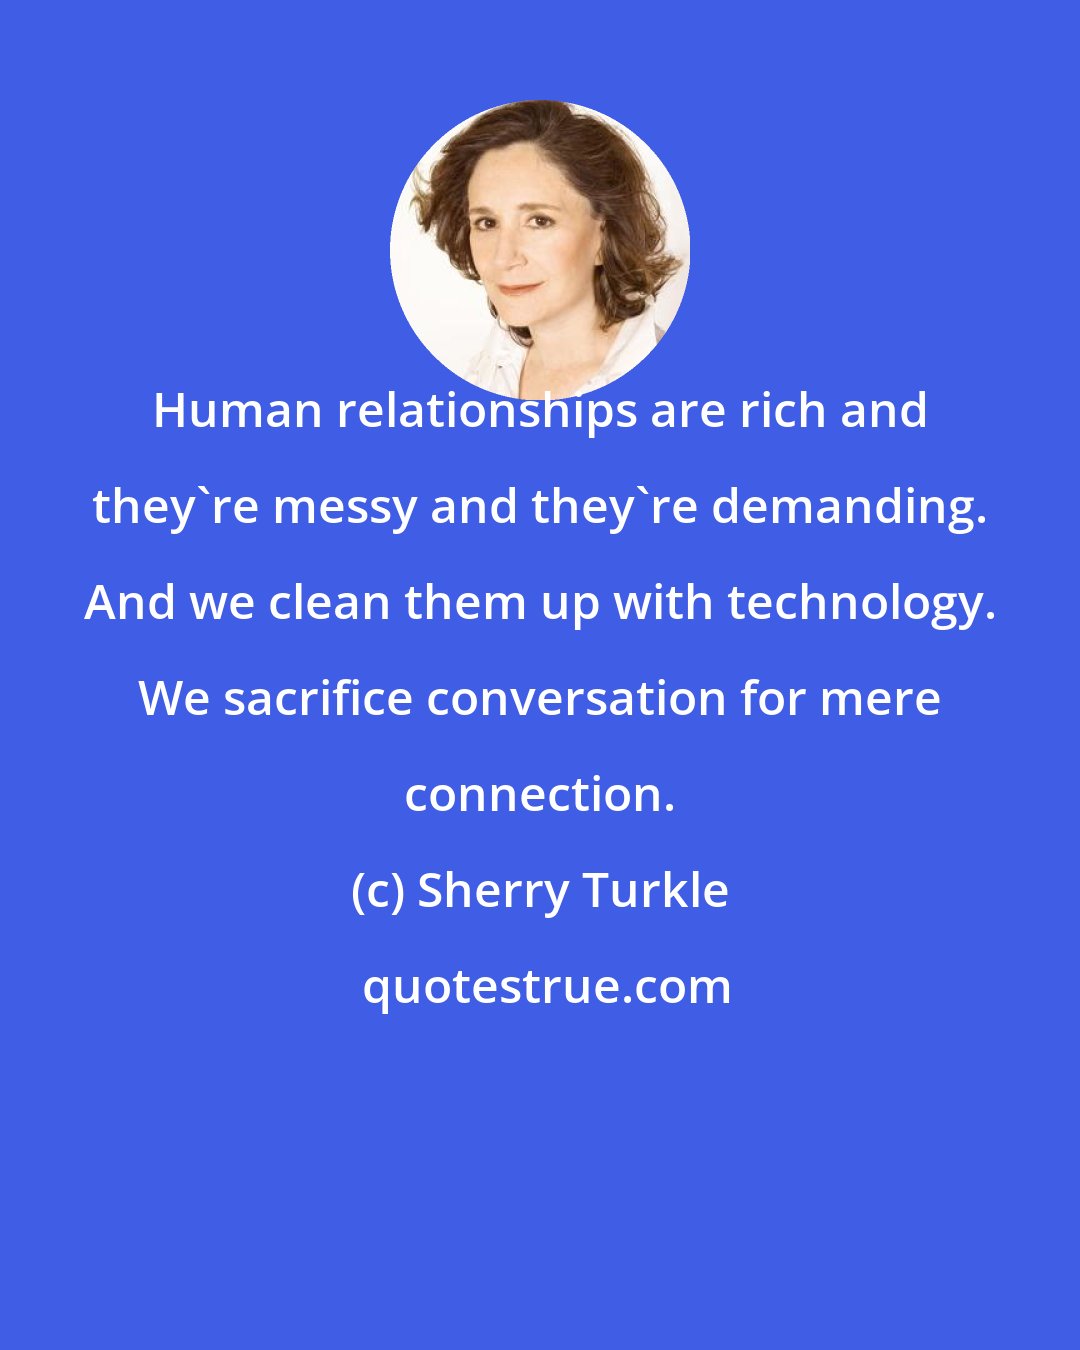 Sherry Turkle: Human relationships are rich and they're messy and they're demanding. And we clean them up with technology. We sacrifice conversation for mere connection.